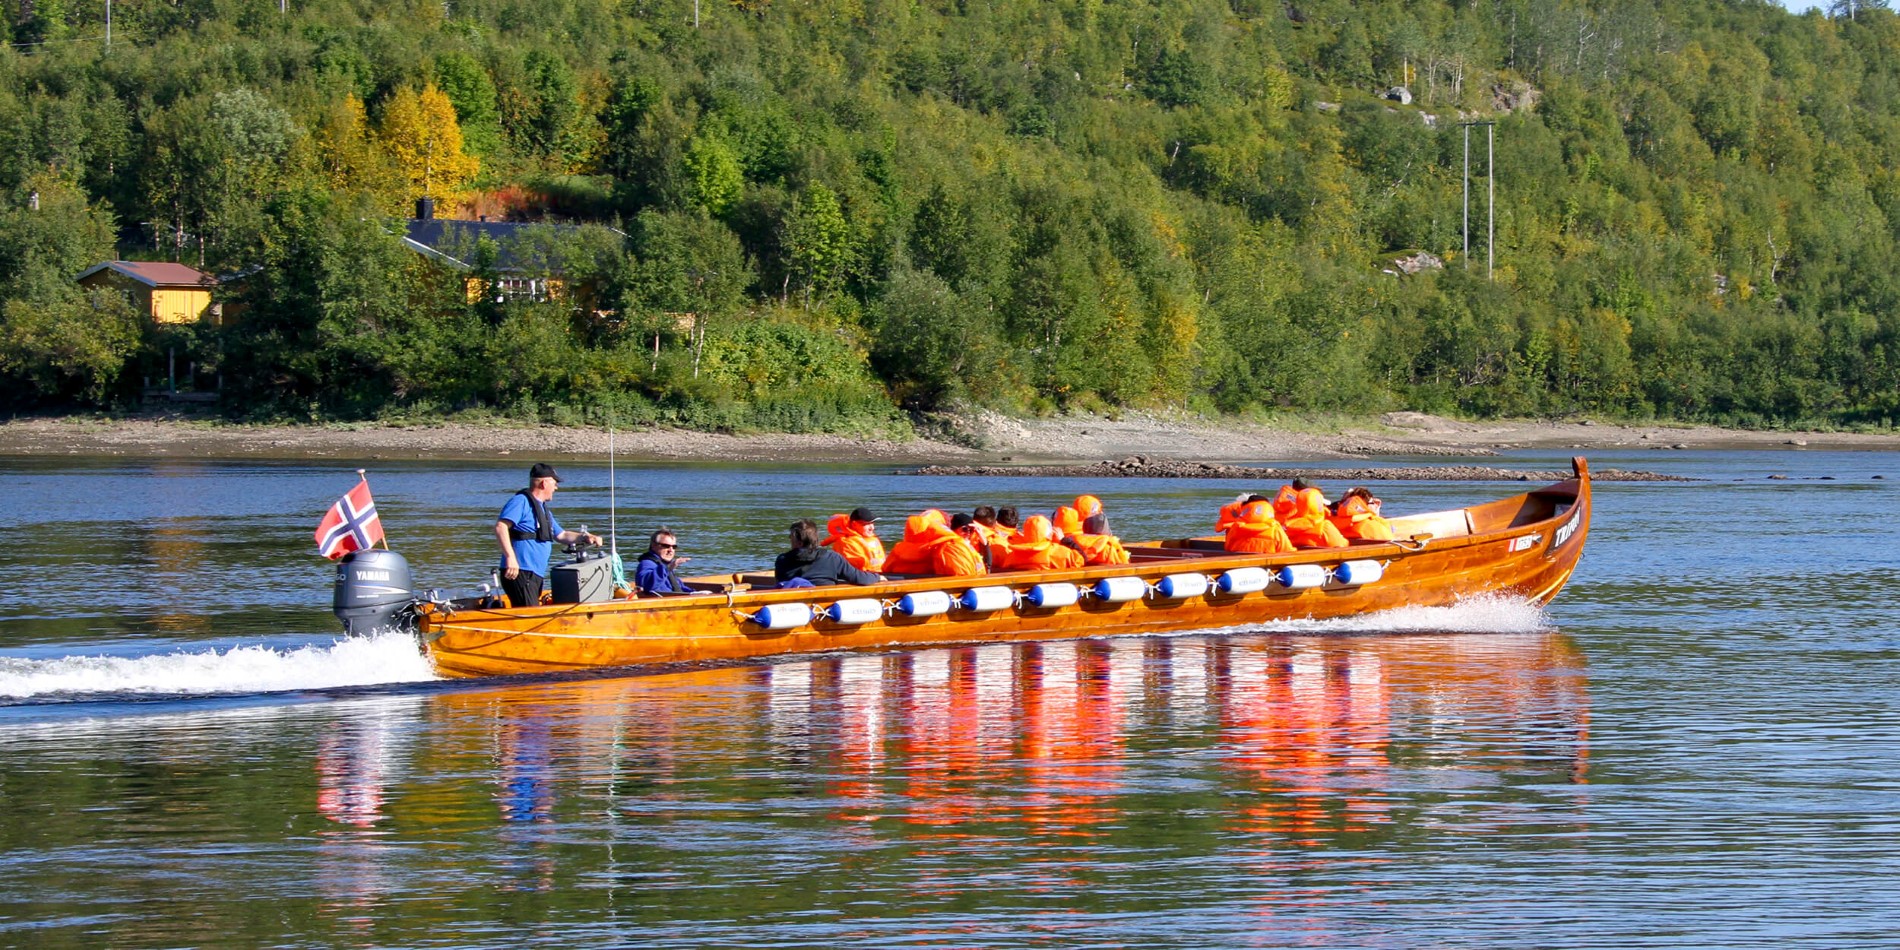 A group of people riding on the back of a boat in the water